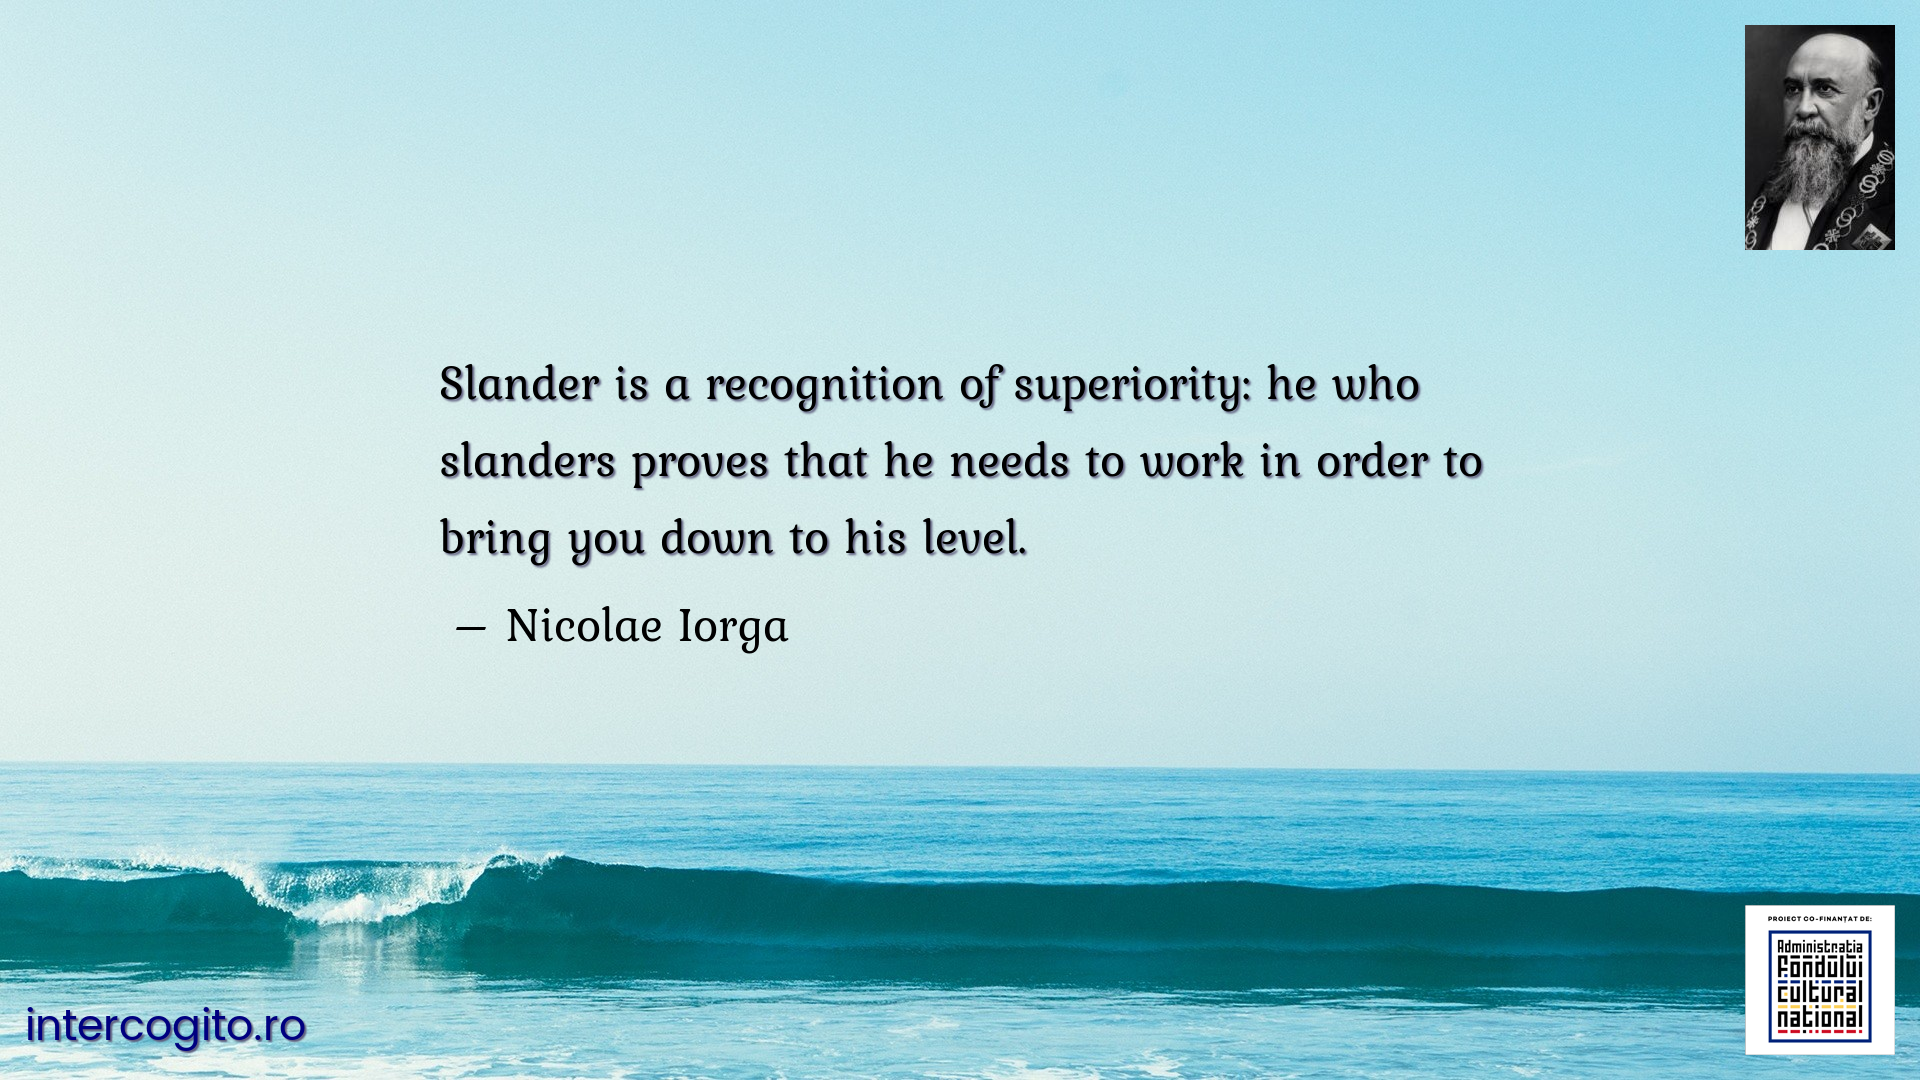 Slander is a recognition of superiority: he who slanders proves that he needs to work in order to bring you down to his level.